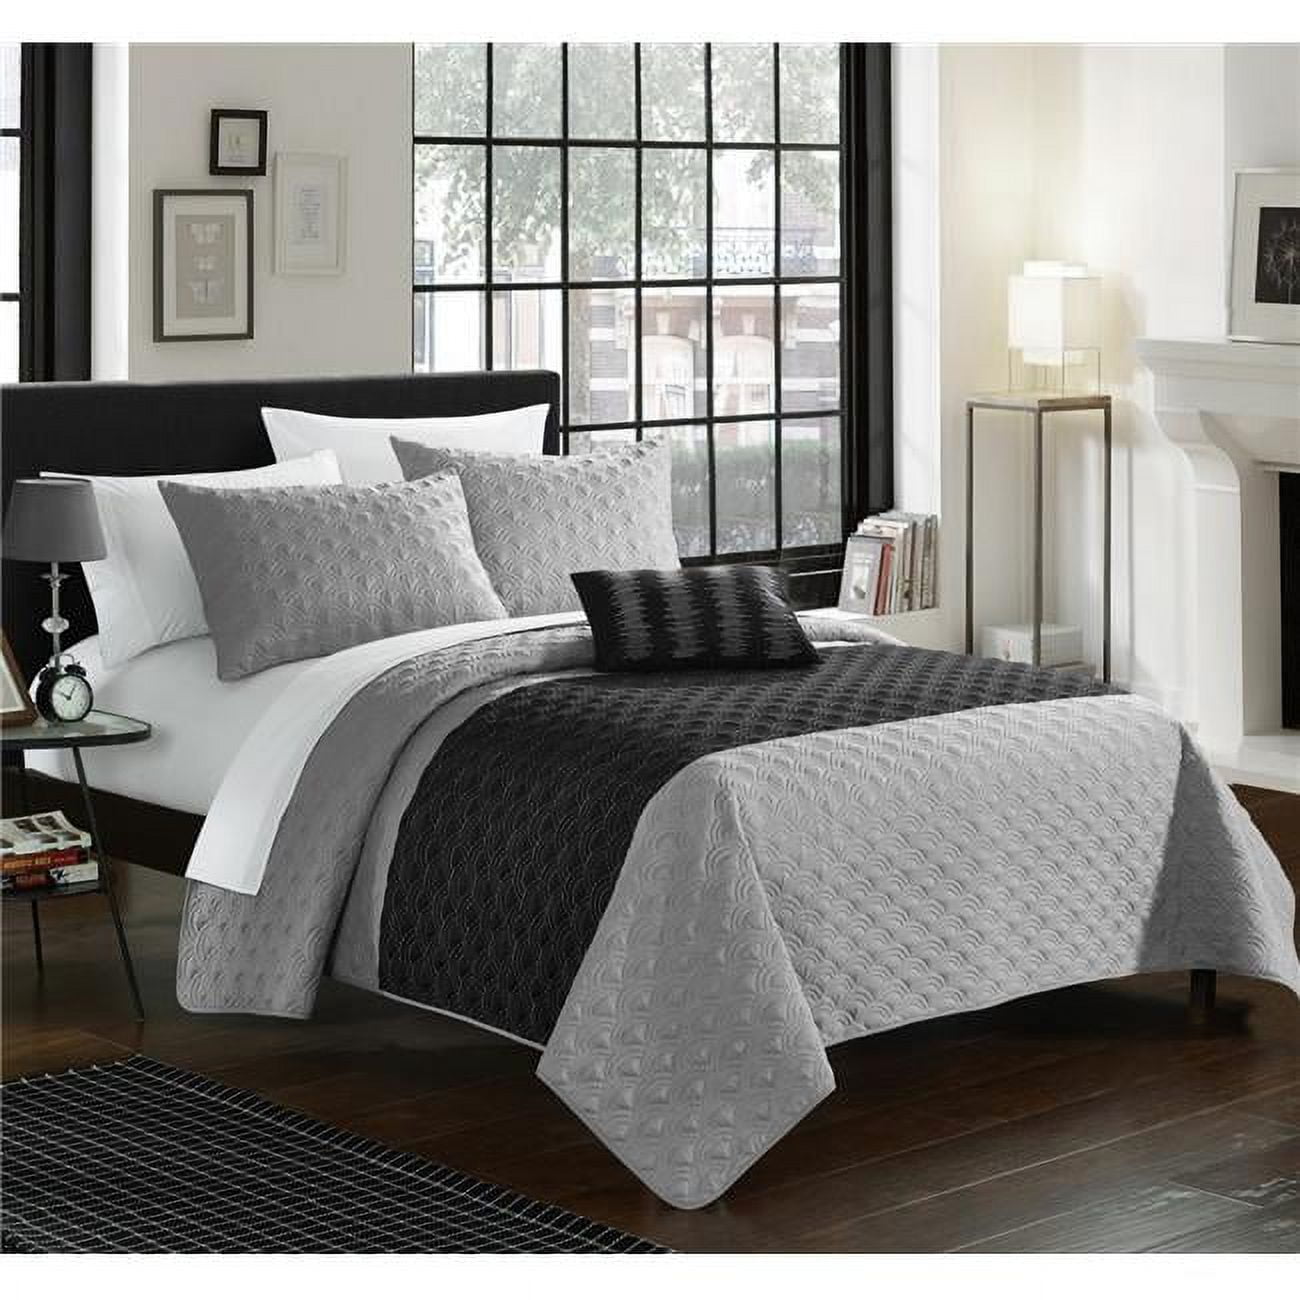 Qs1986-us 4 Piece Ellias Contemporary Two Tone Geometric Embroidered Quilted Bed Cover Set, Queen